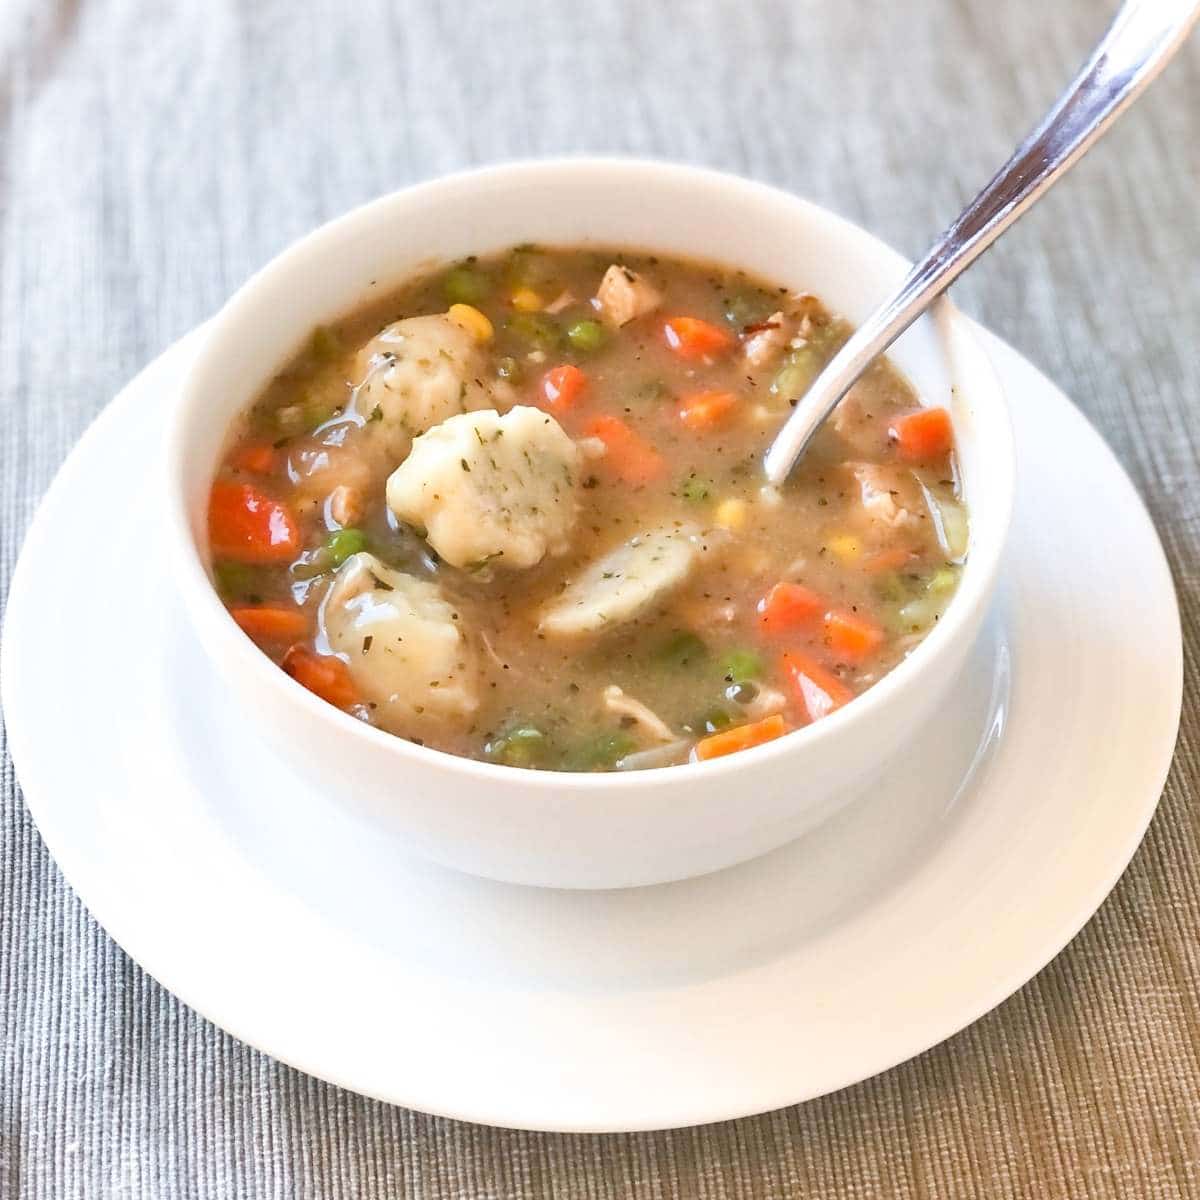 A bowl of gluten free dairy free chicken and dumplings stew